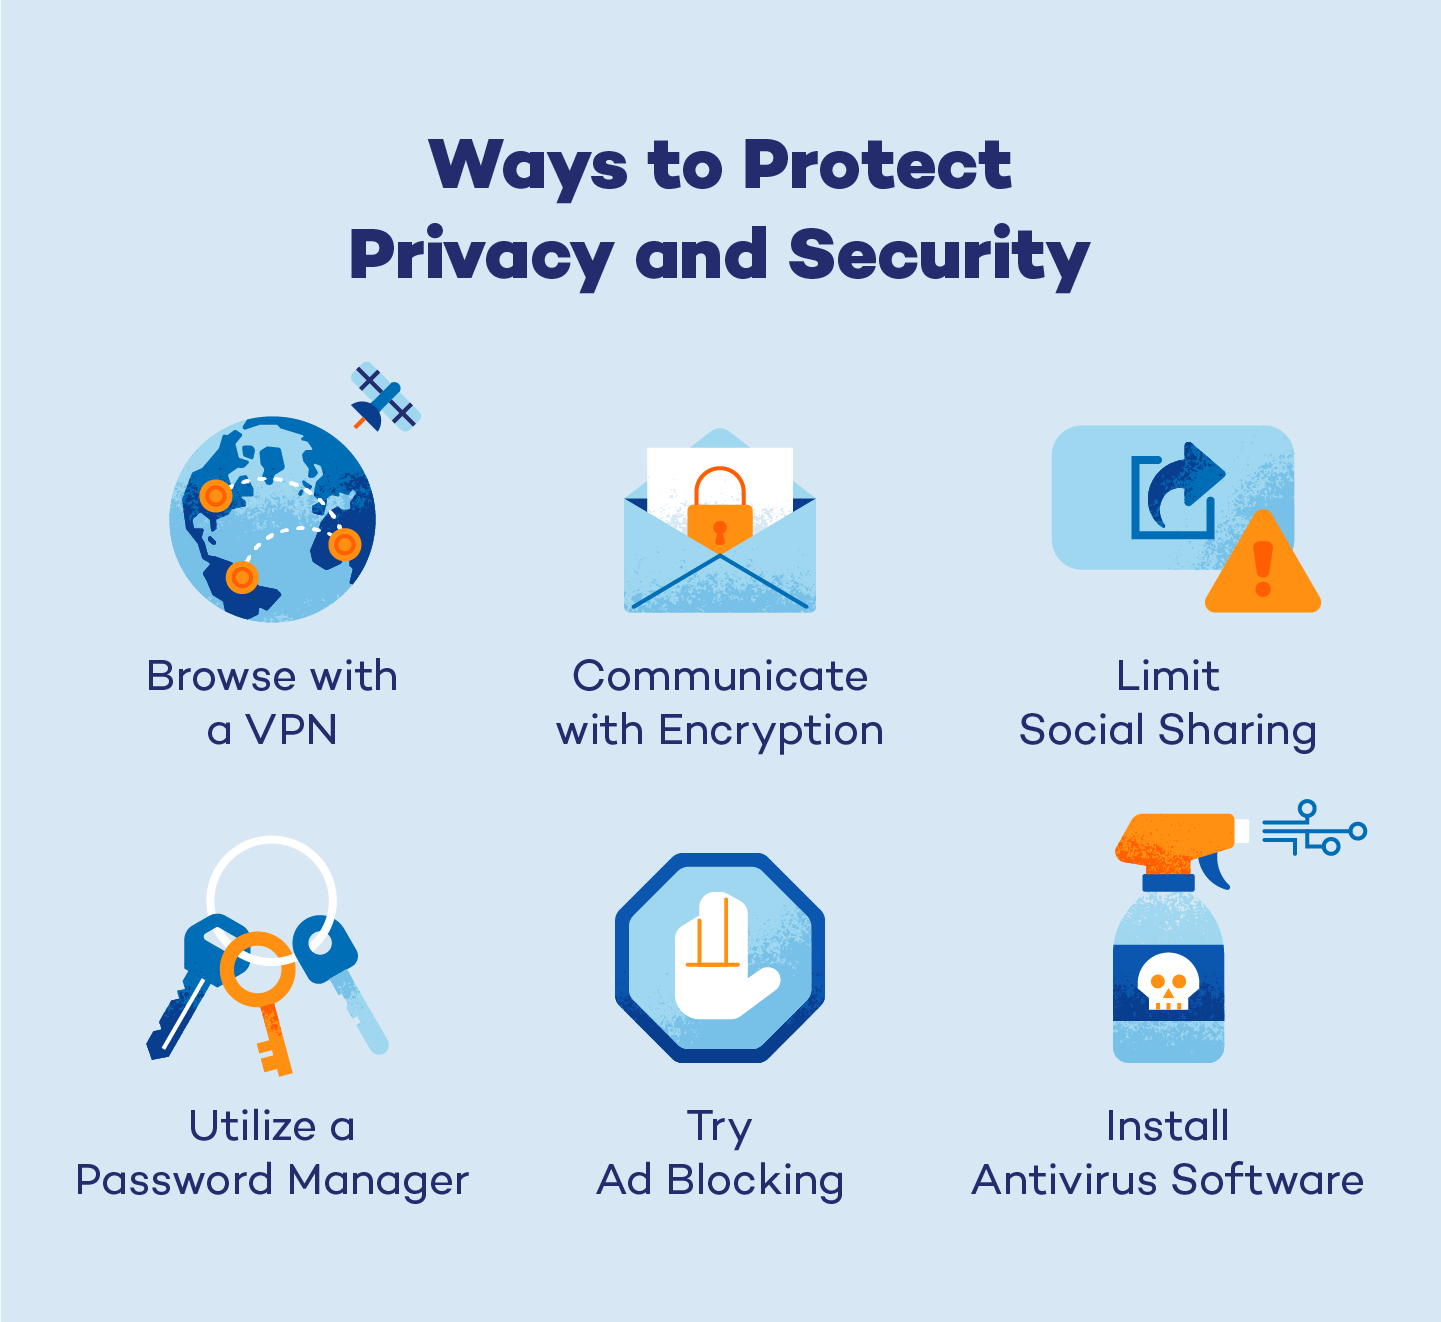 Privacy and security can be protected by VPNs, antivirus software, and more.